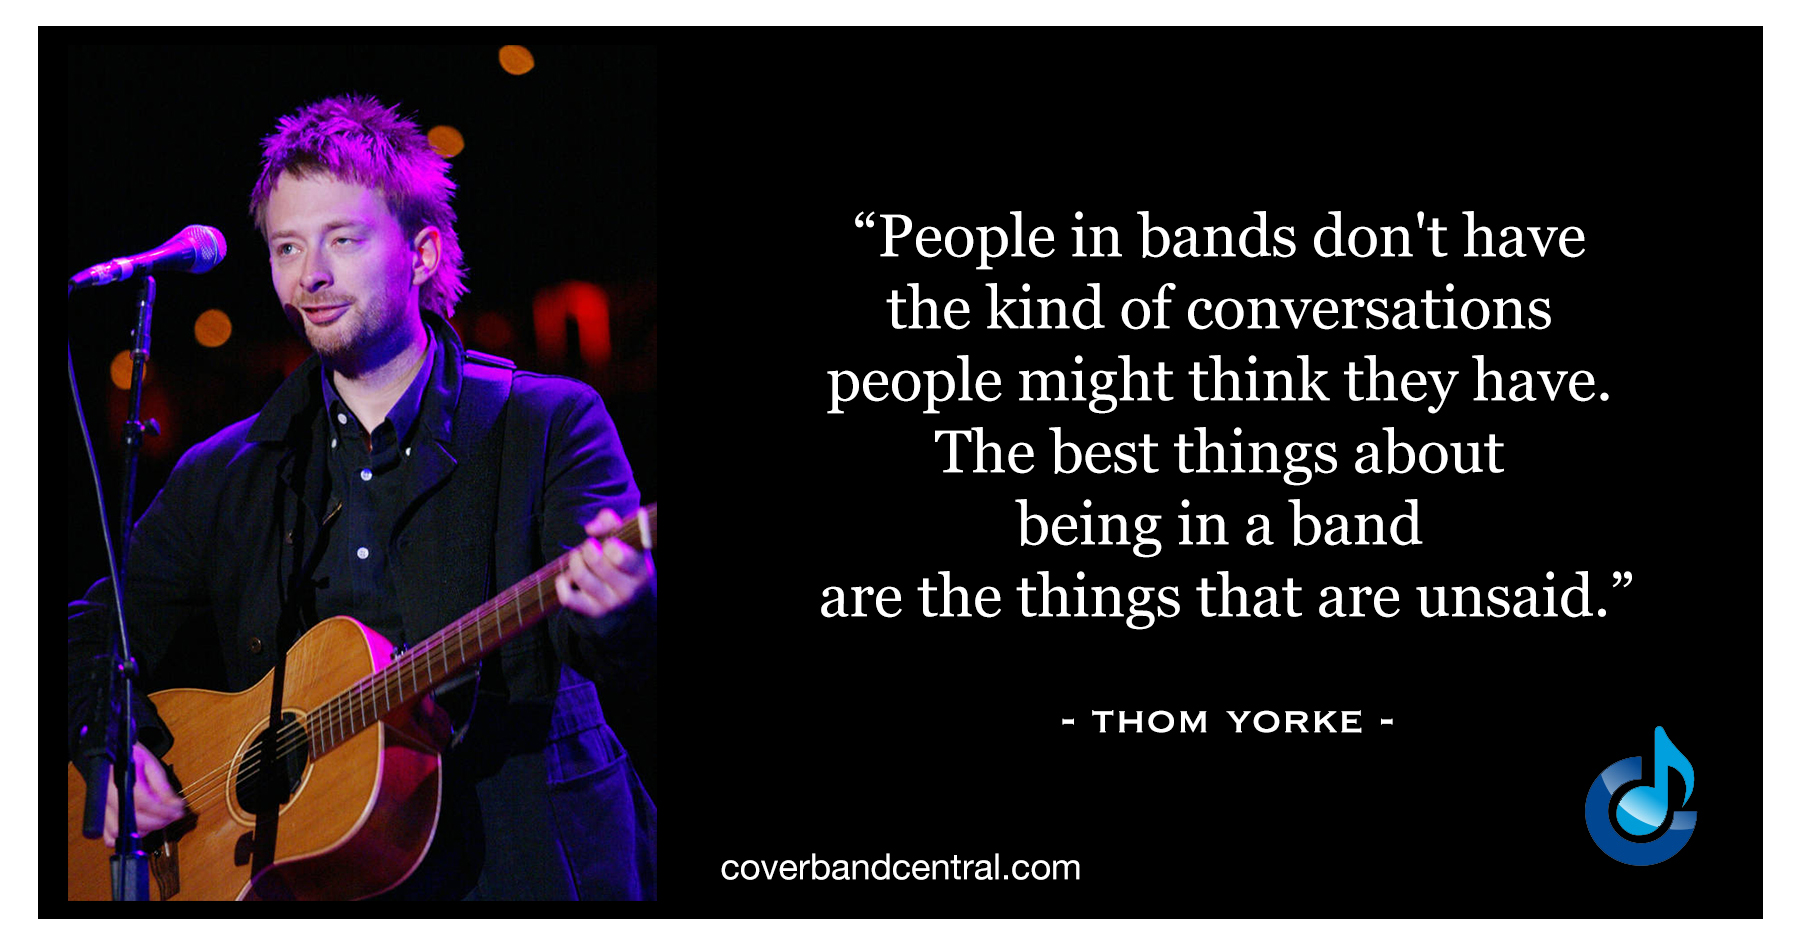 Thom Yorke quote